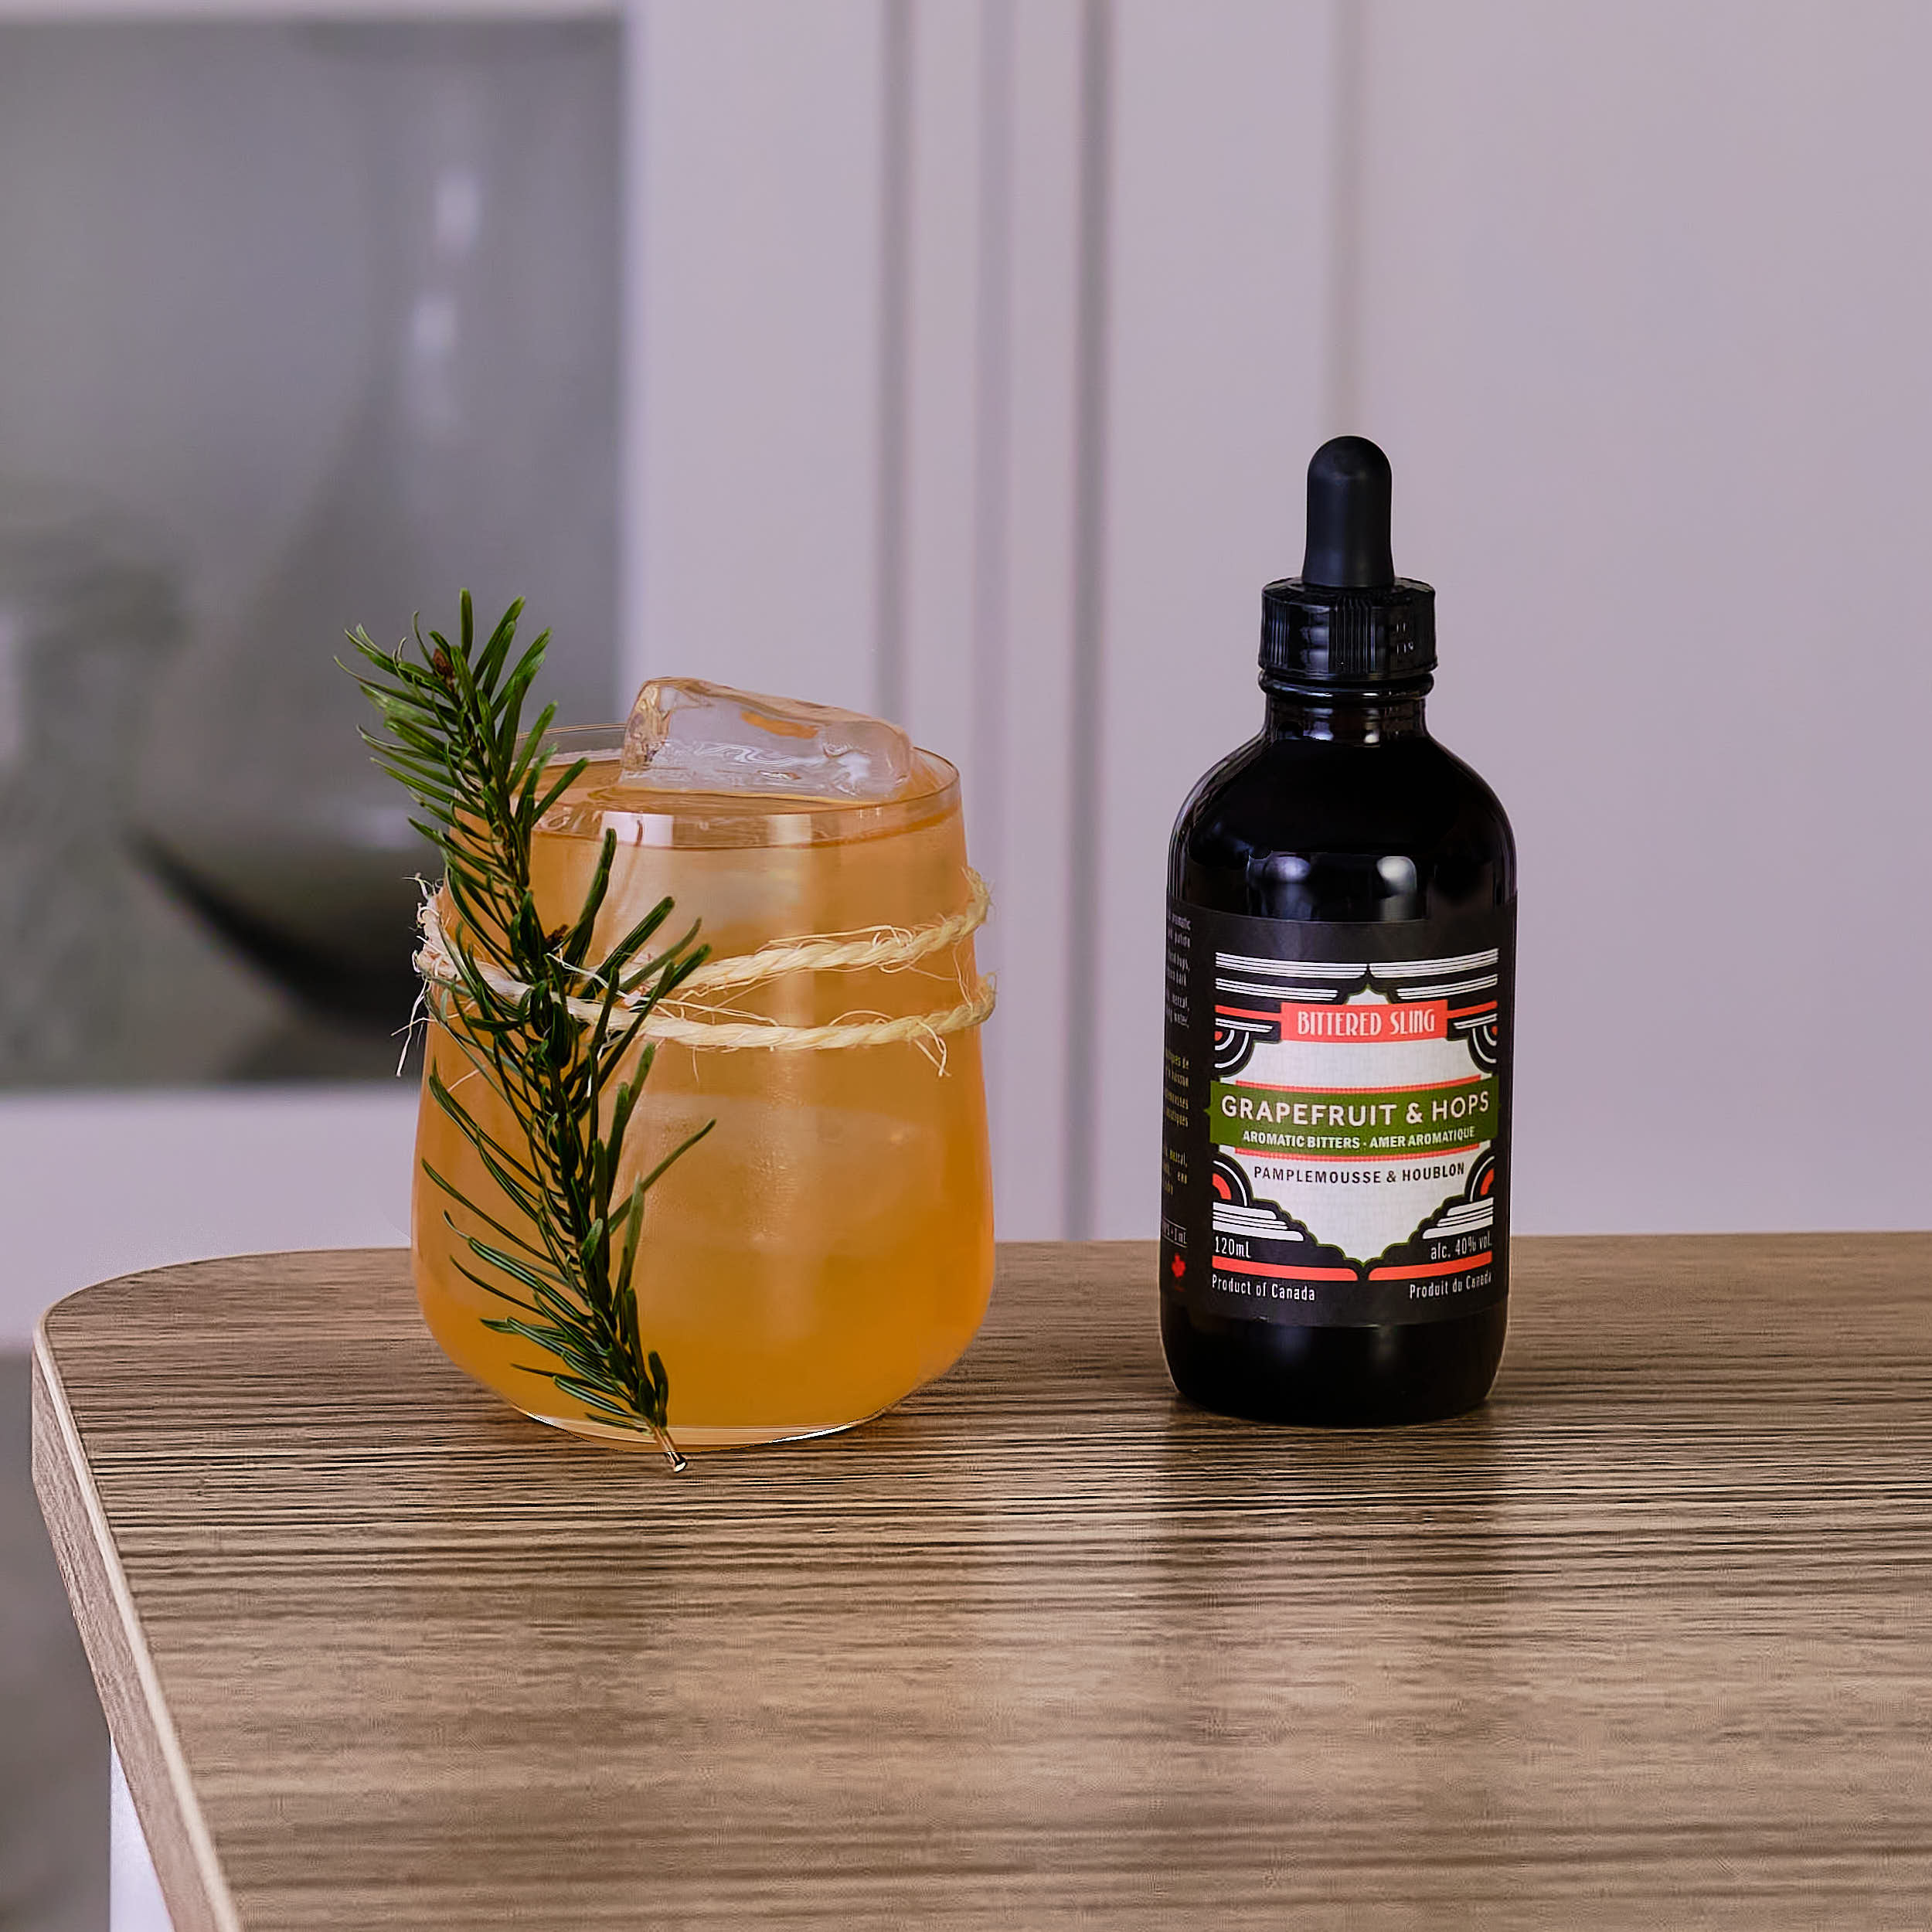 Drink with Grapefruit and Hops bitters beside it